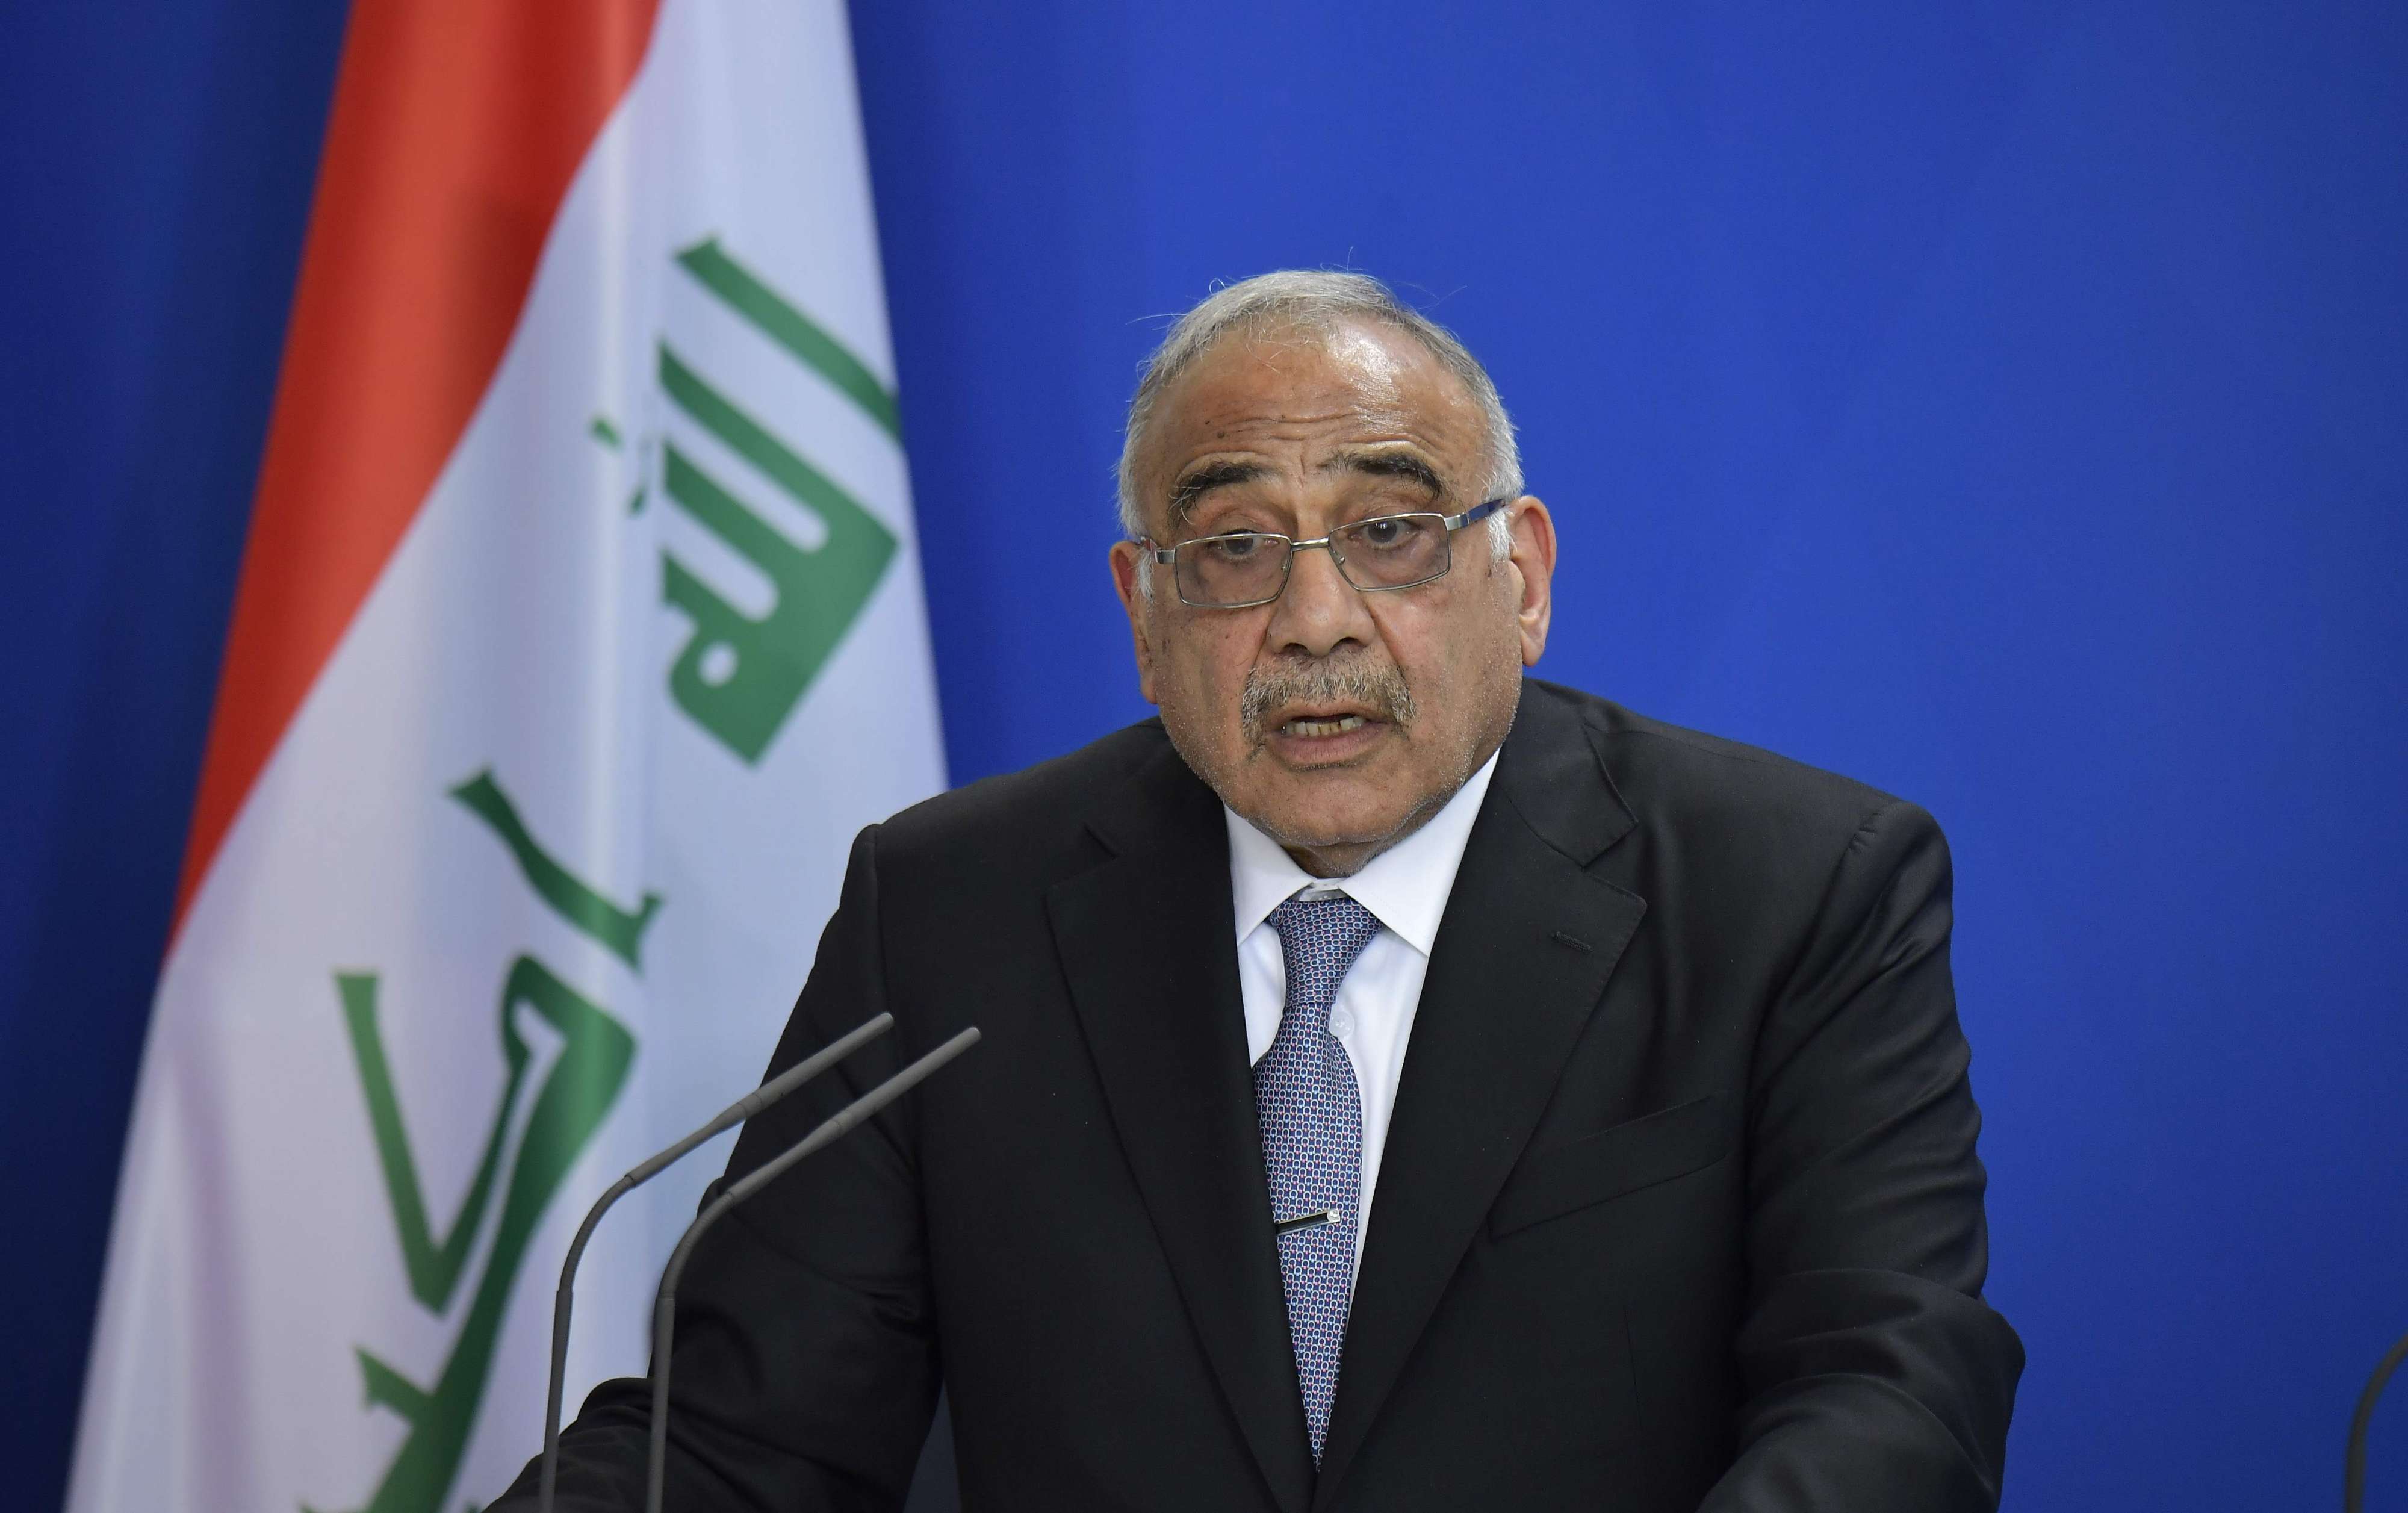 Abdel Mahdi stressed the need to "avoid giving other parties the space to inflame the situation"